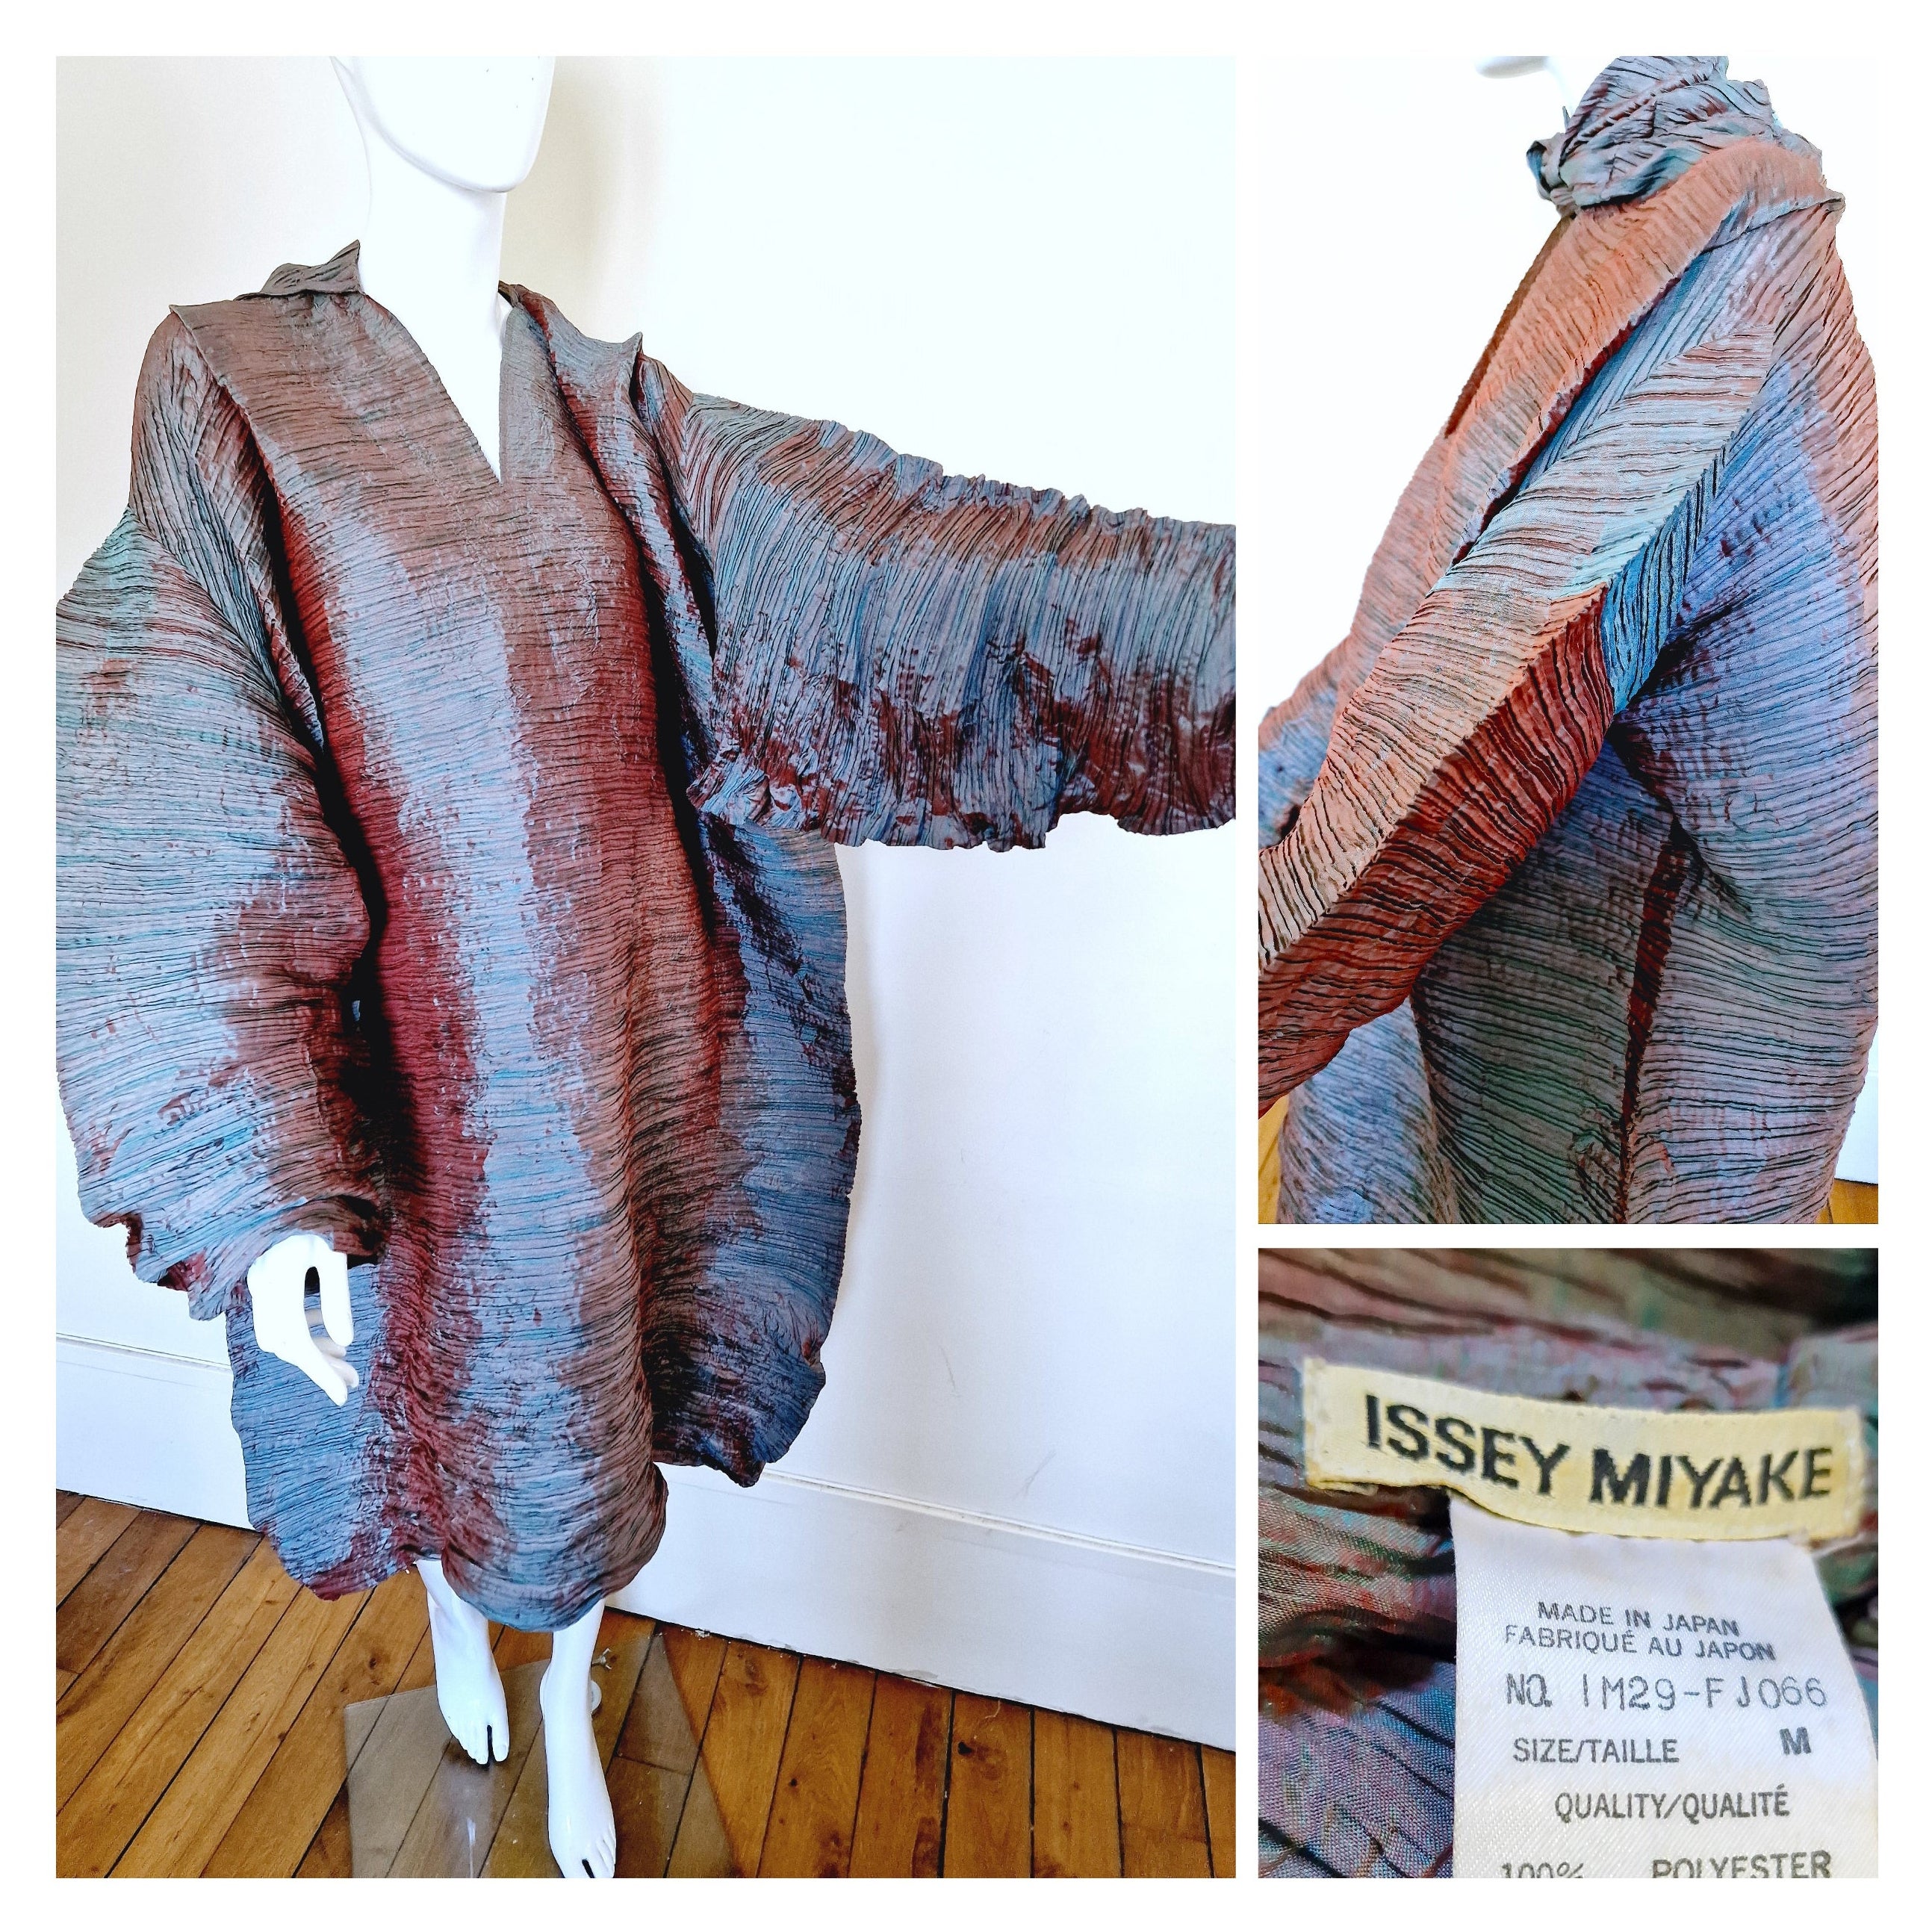 Rare Issey Miyake Metal Sculpture Oversize Pleated 80s 70s Vintage Dress Gown For Sale